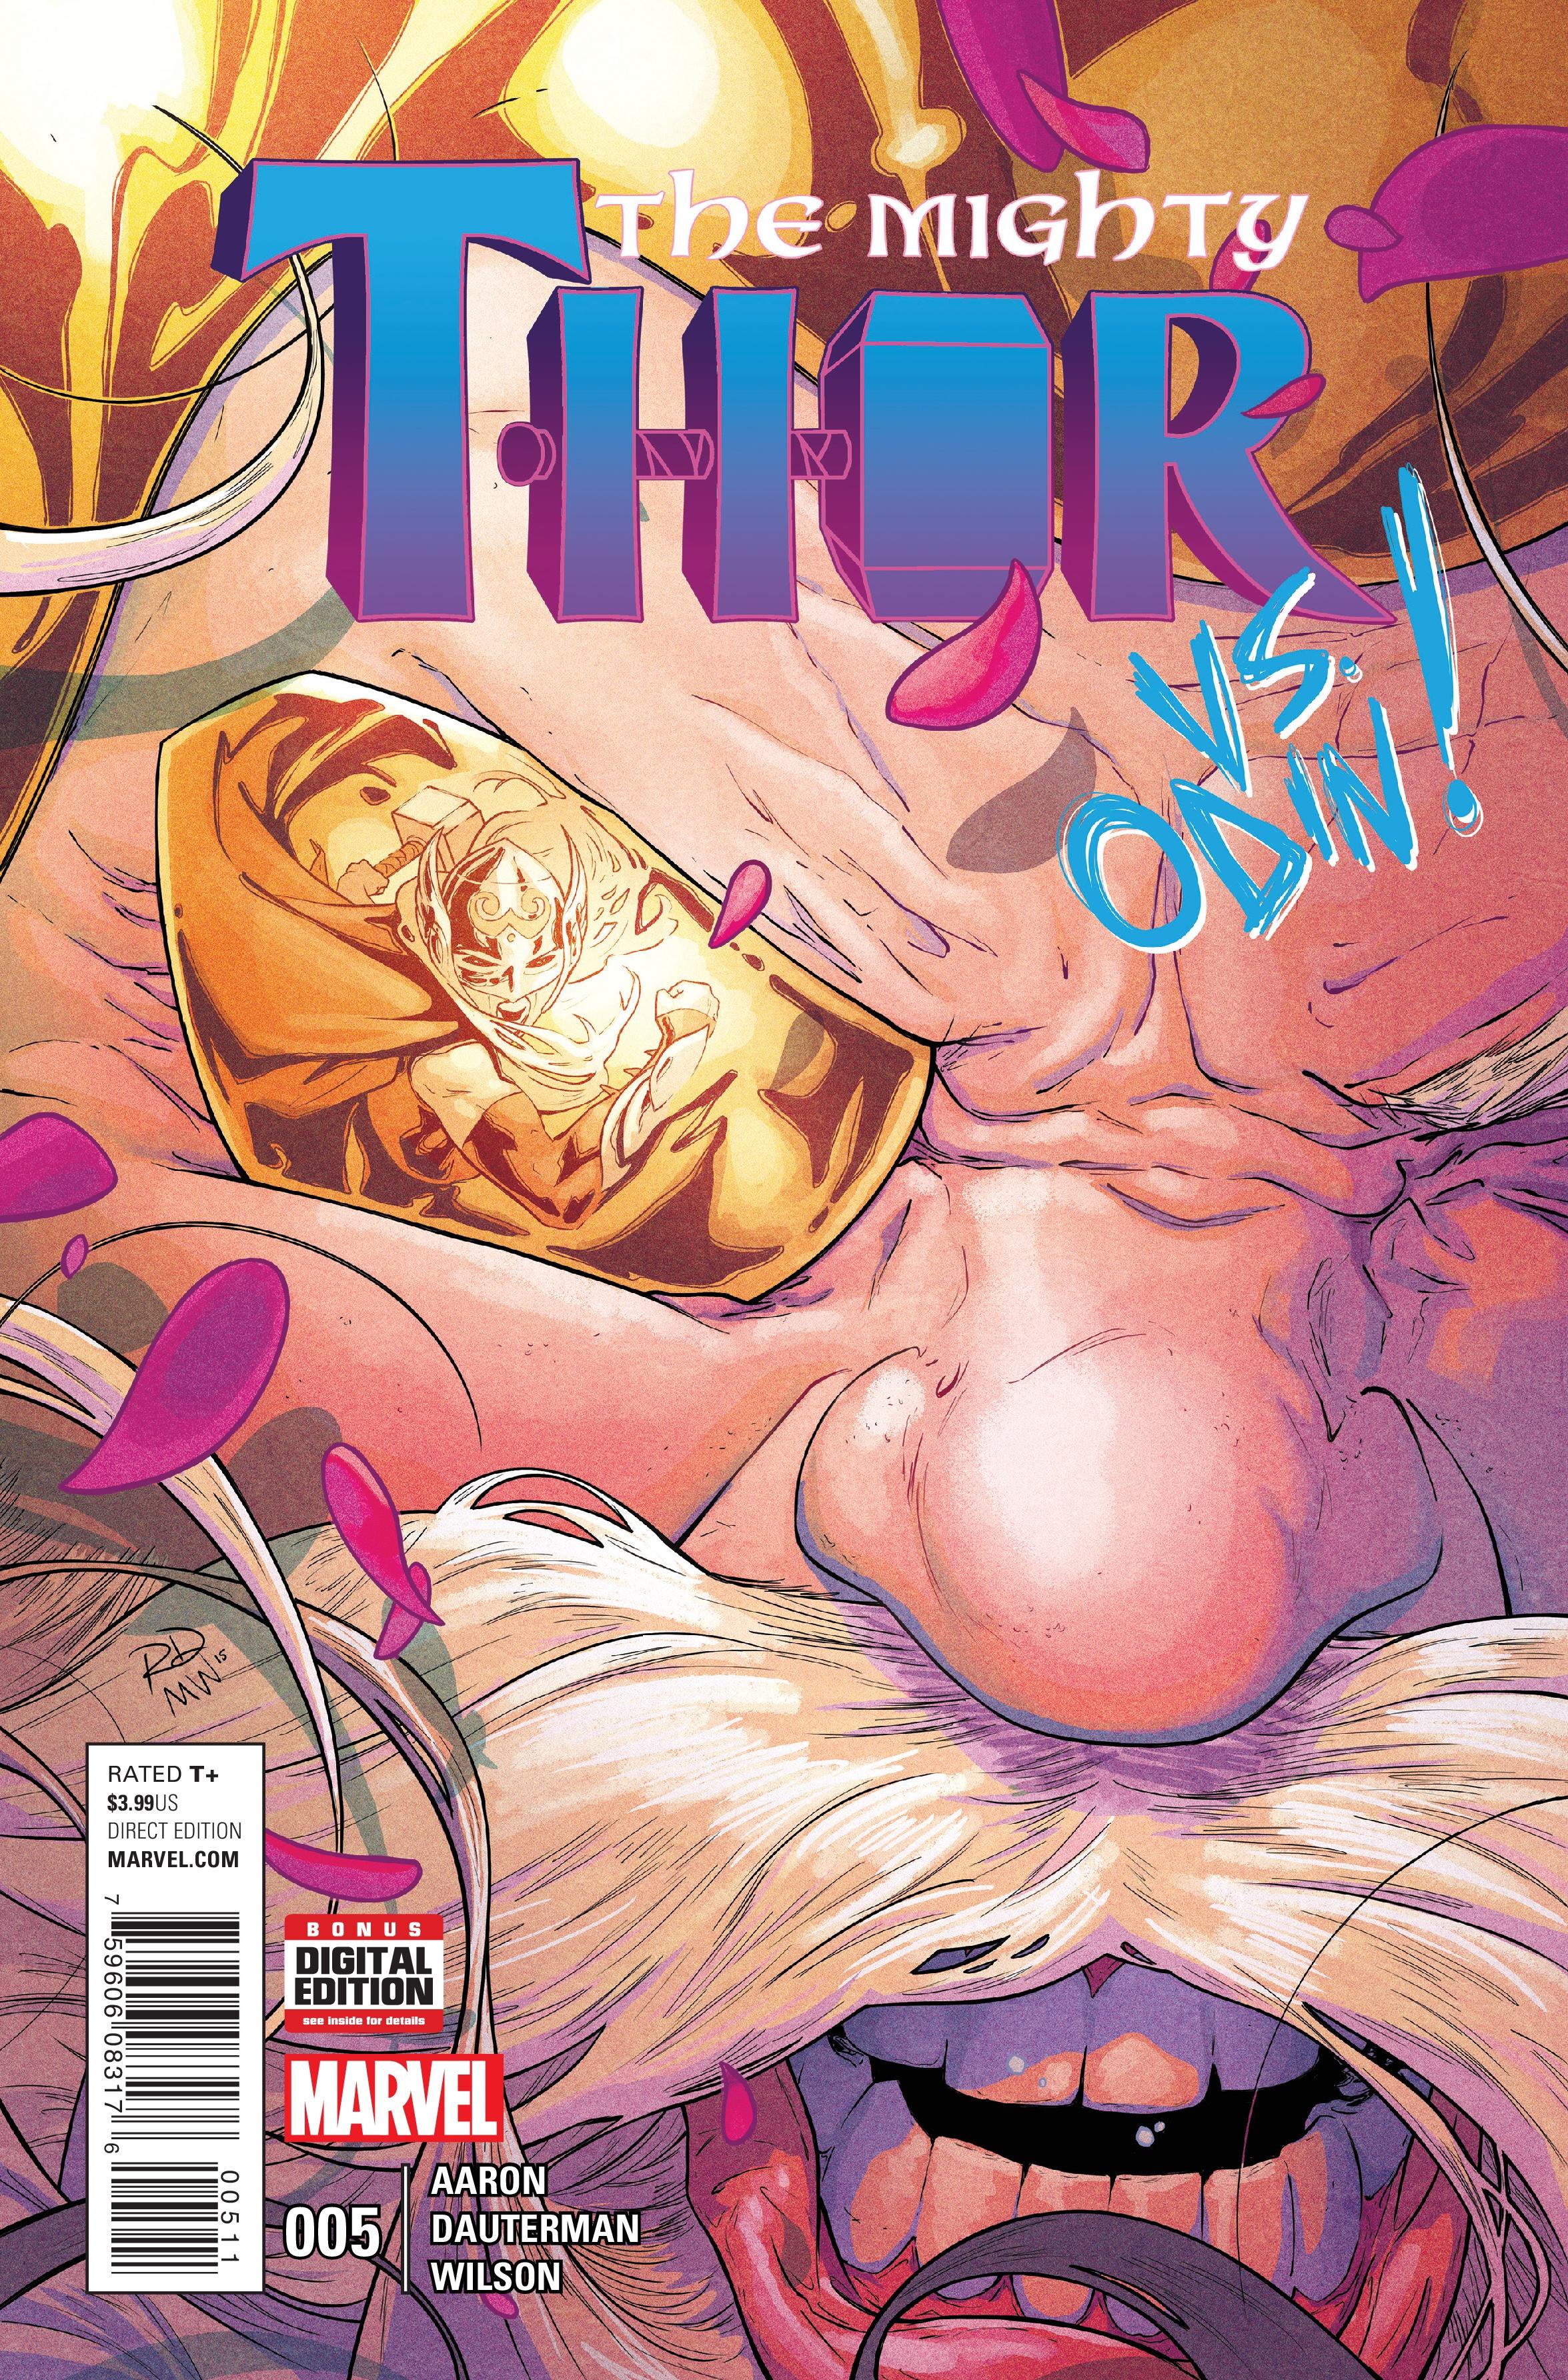 The Mighty Thor Vol. 2 #5